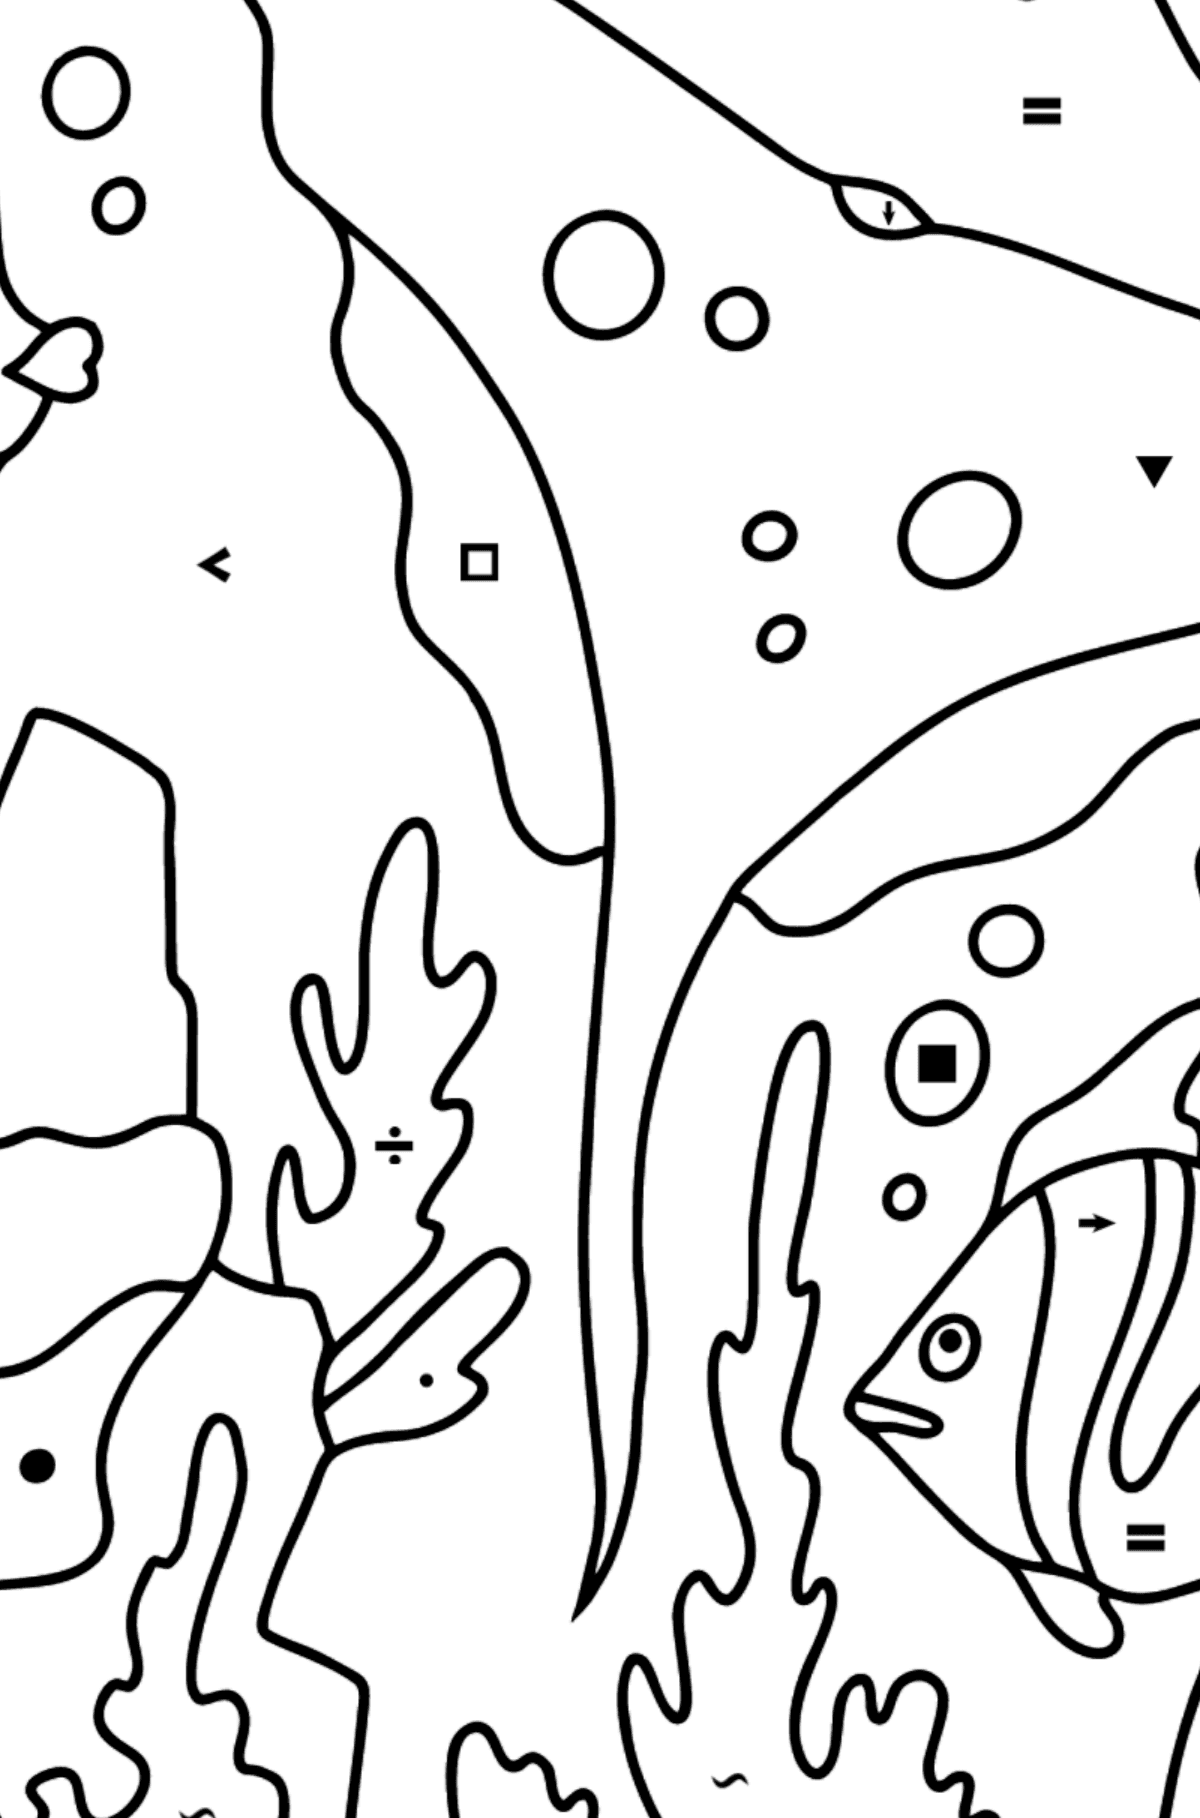 Coloring Page - Fish and Ray are Playing - Coloring by Symbols for Kids